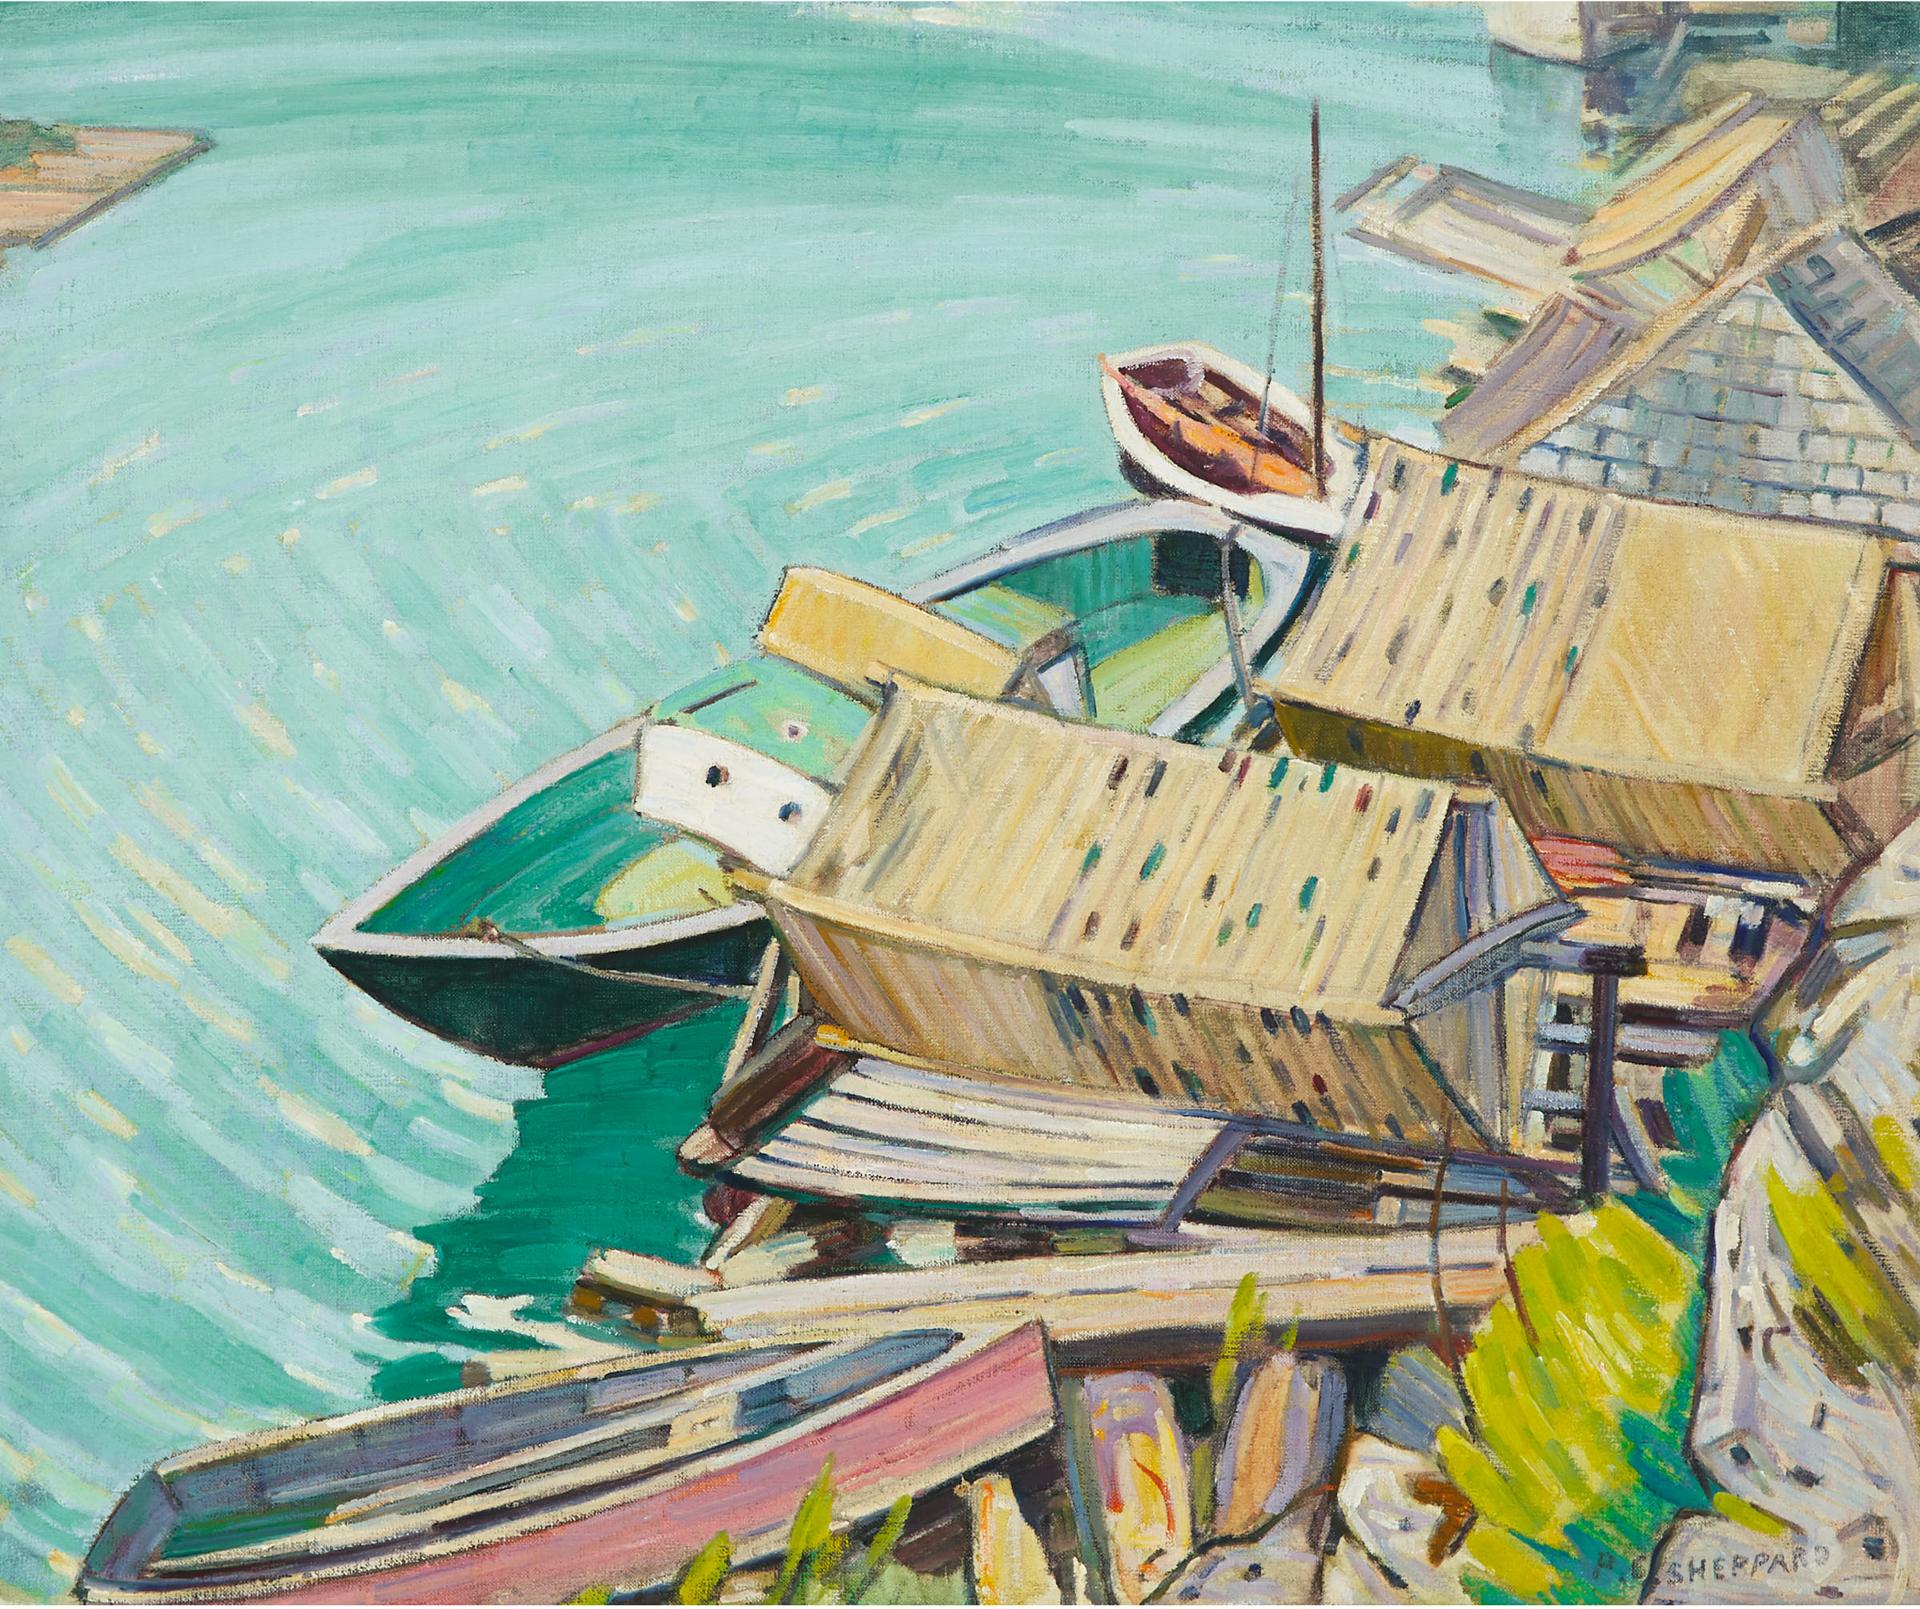 Peter Clapham (P.C.) Sheppard (1882-1965) - The Green Boat, Port Credit, 1929-30